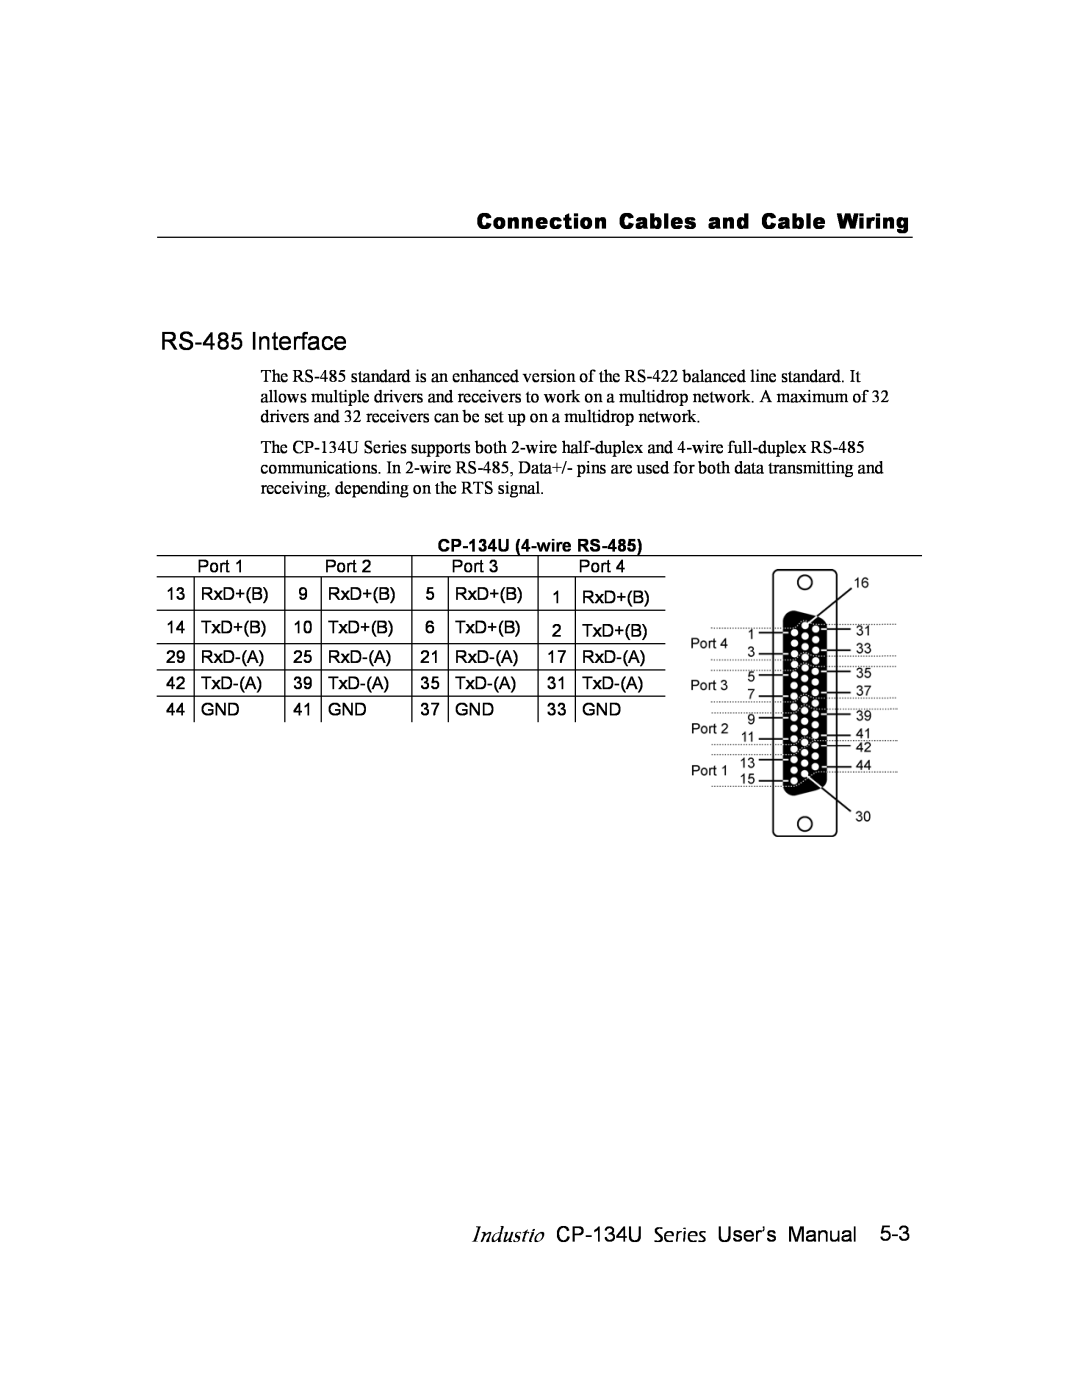 Moxa Technologies user manual RS-485 Interface, CP-134U 4-wire RS-485, Connection Cables and Cable Wiring 